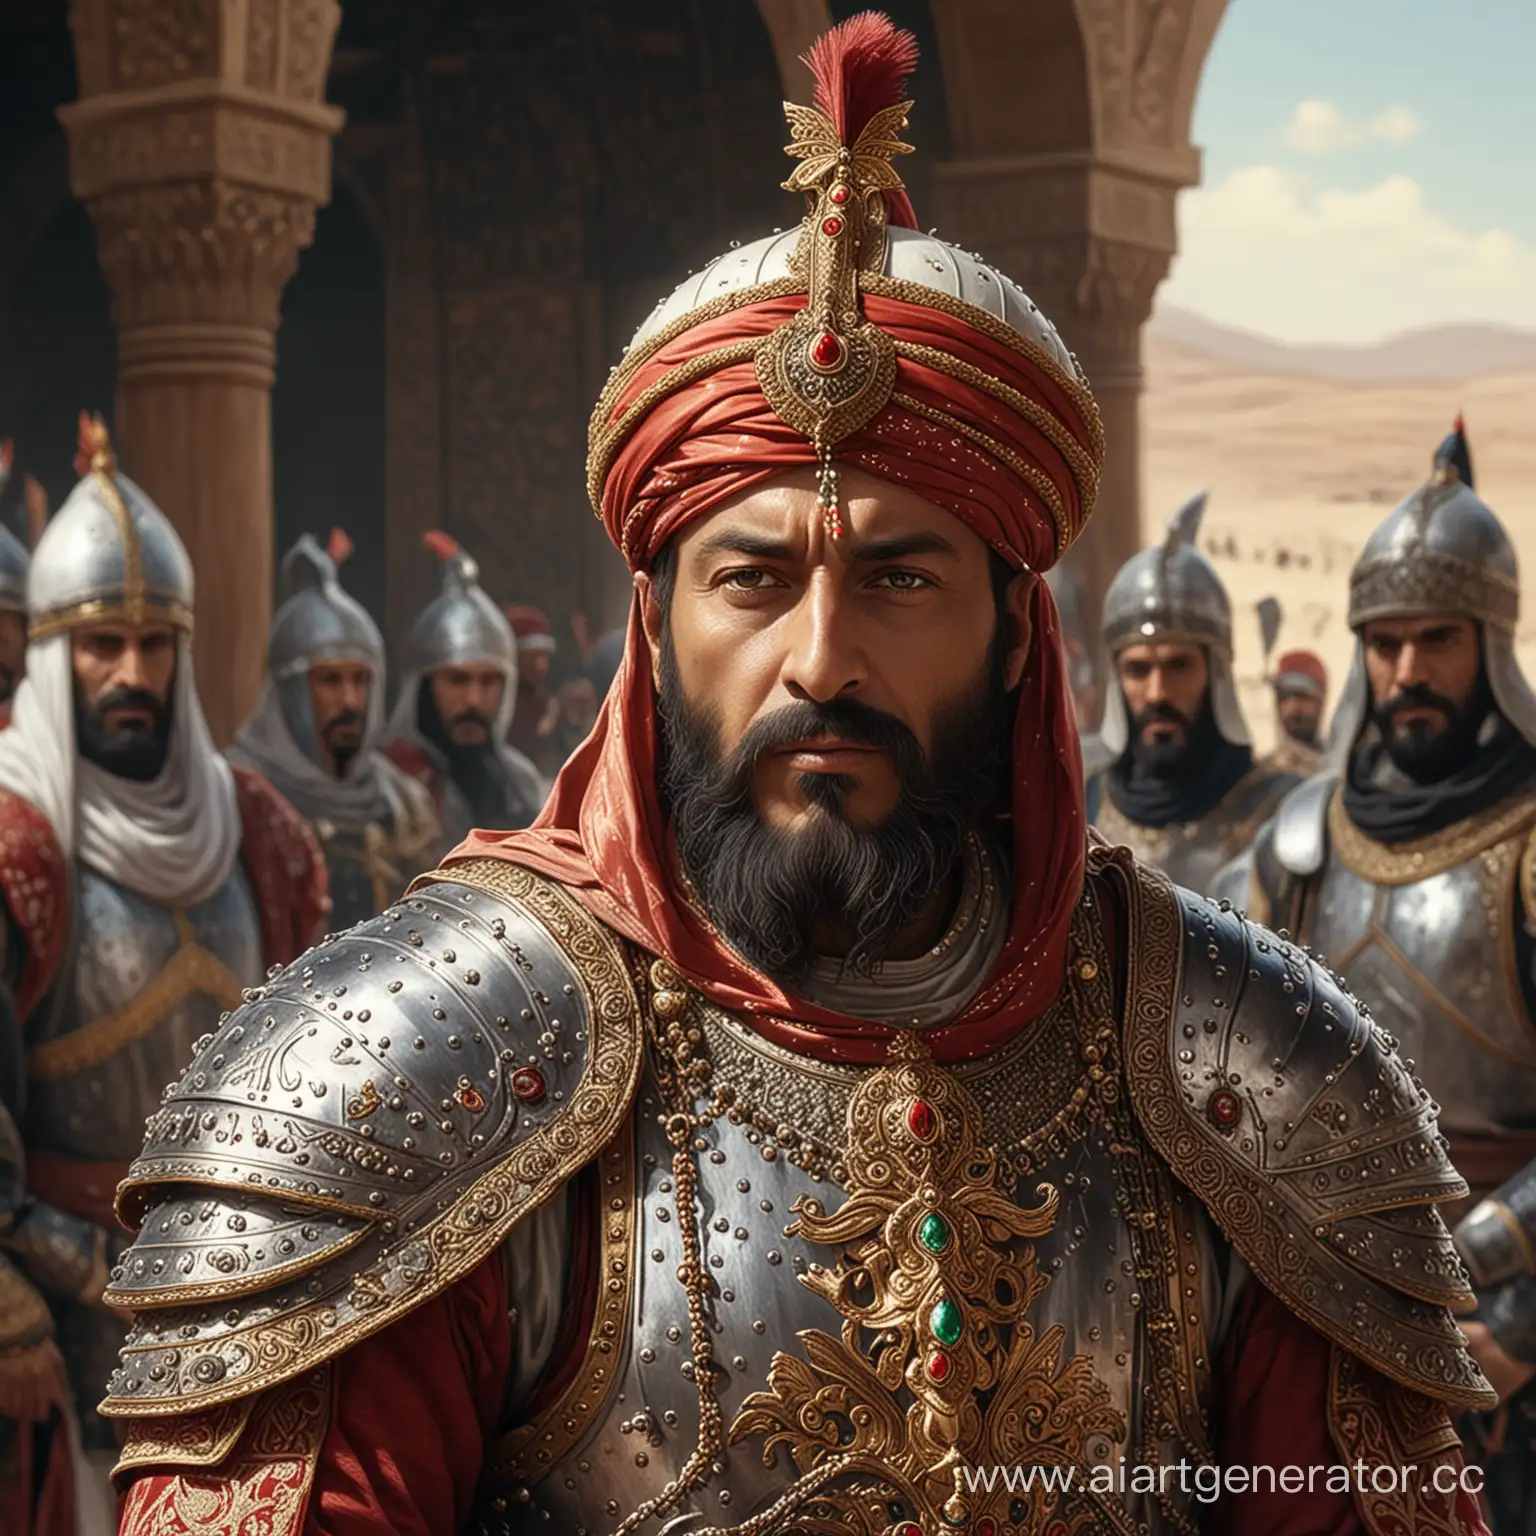 Sultan-Dressed-in-Traditional-Armor-with-Ornate-Details